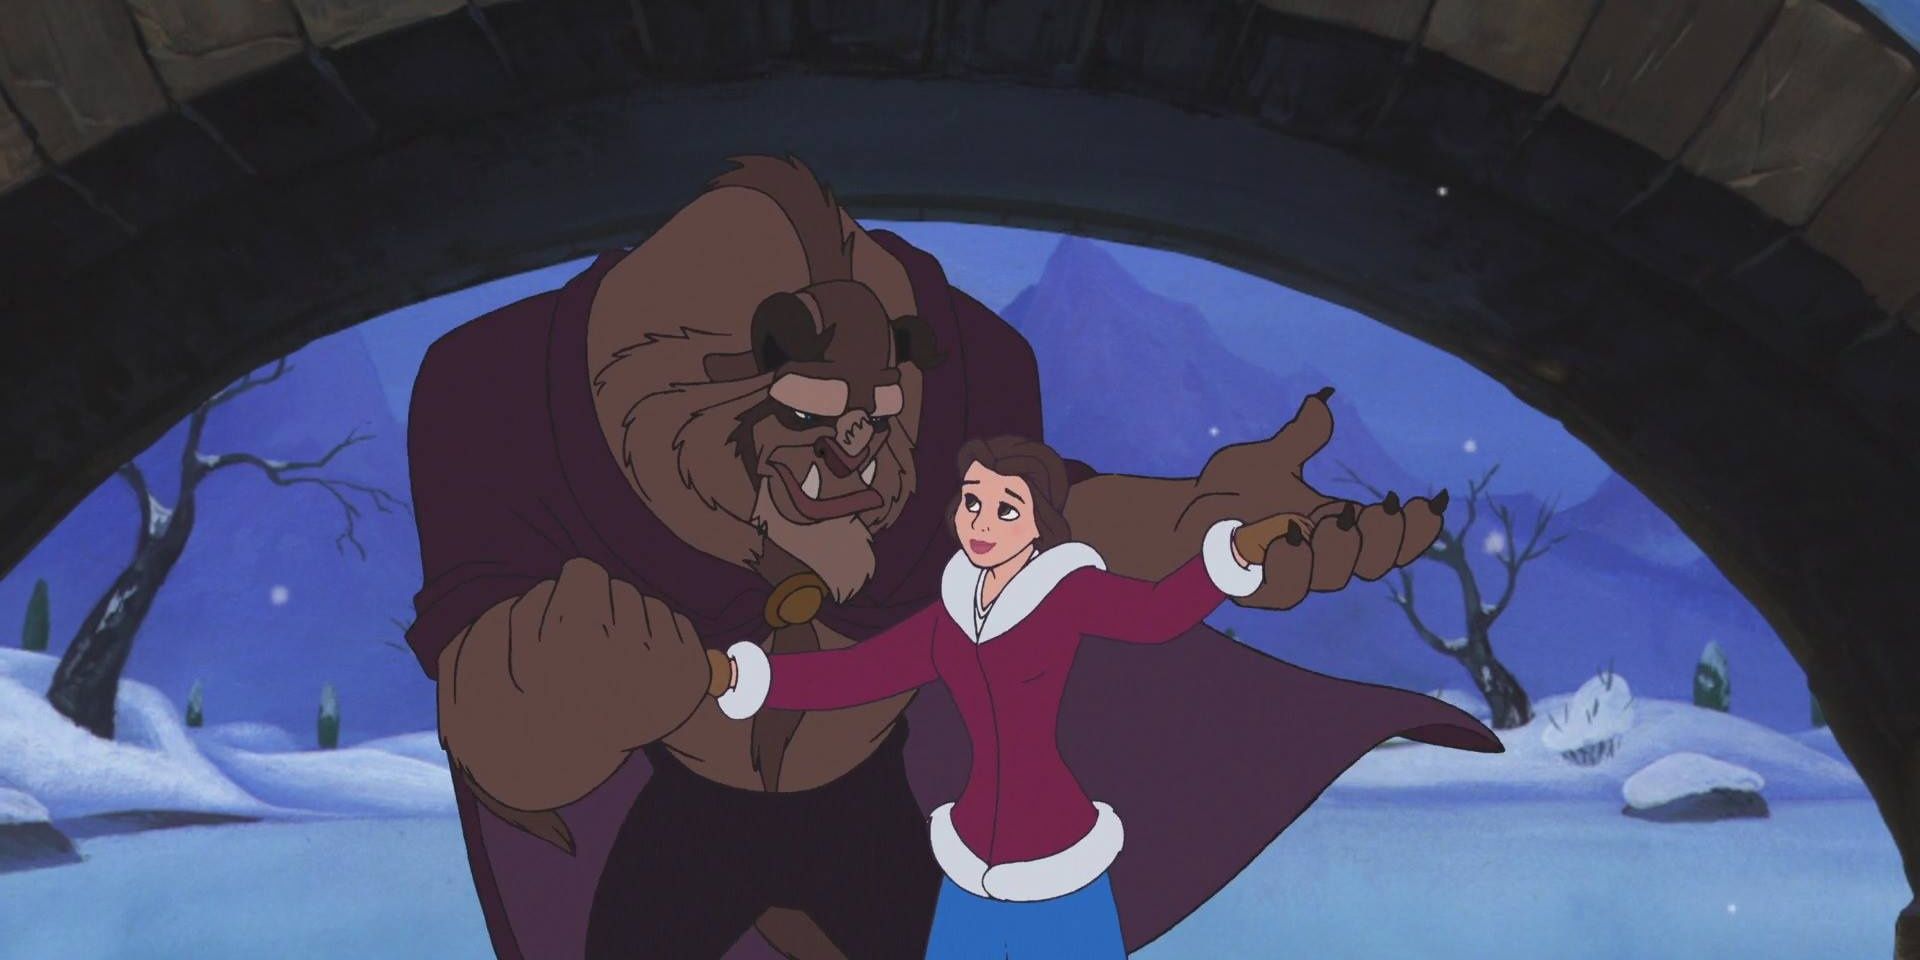 Beauty and the beast skating together in The Enchanted Christmas